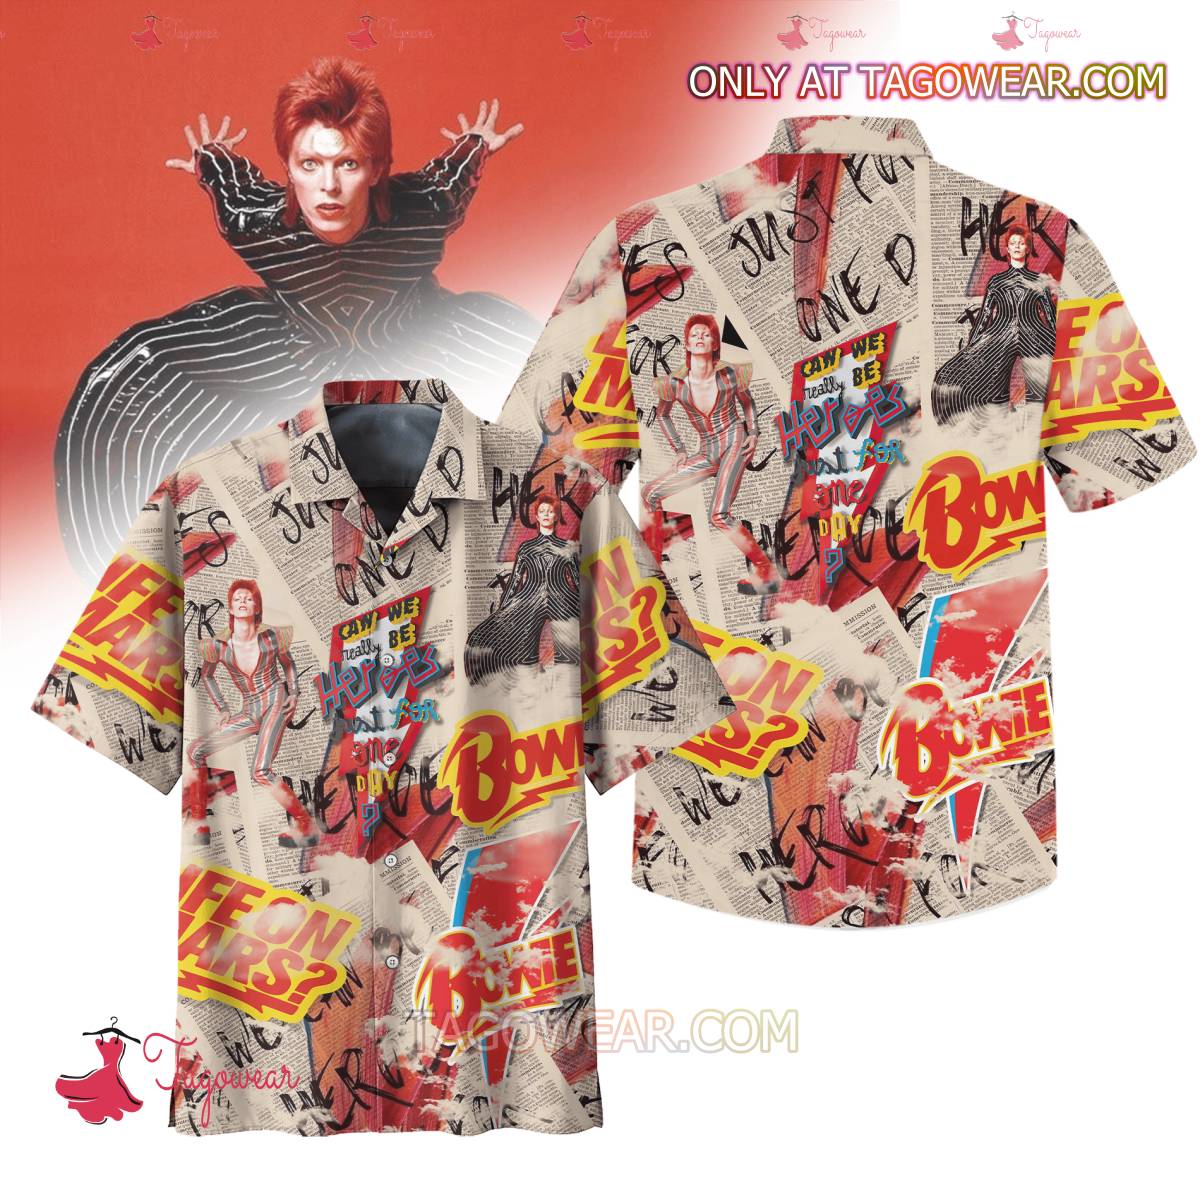 David Bowie Can We Really Be Heroes Just For One Day Hawaiian Shirt